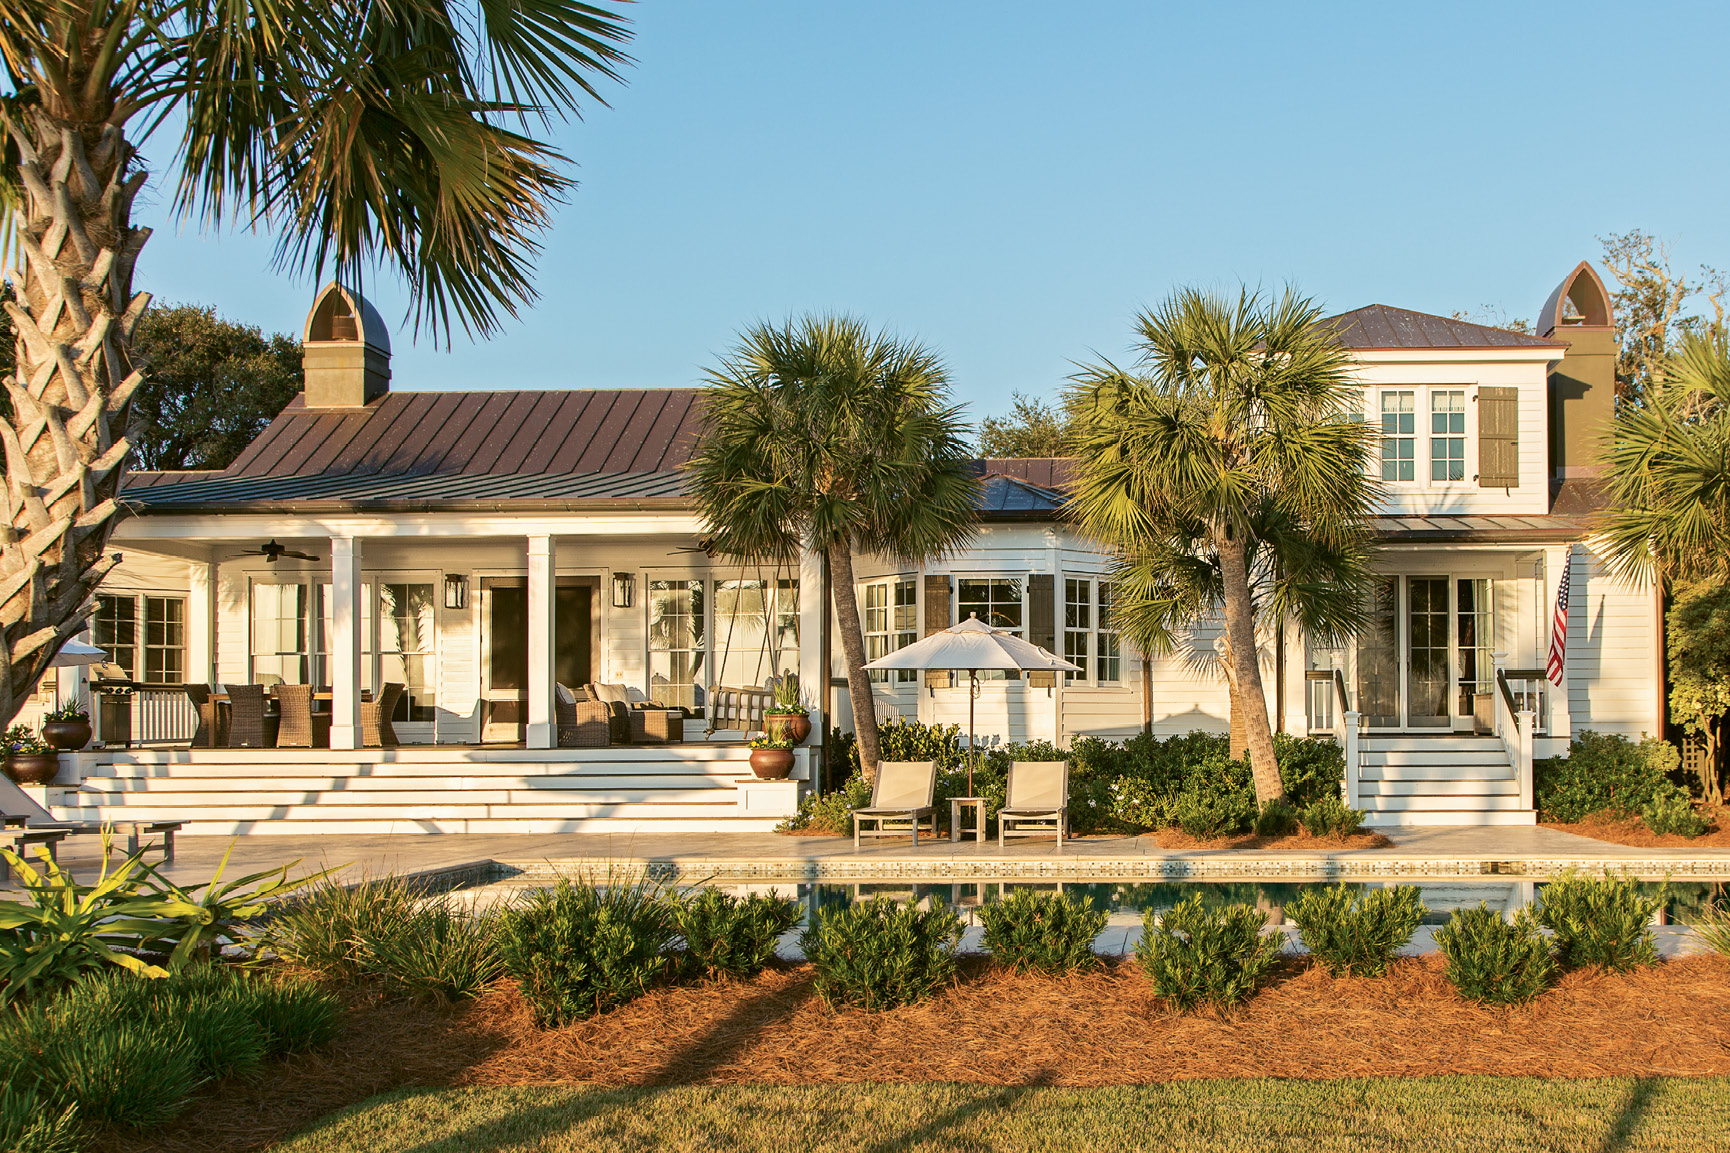 LOVE AT FIRST SIGHT: Charleston native Tara King first fell for this Sullivan’s Island house in her teens. After admiring it from afar for some 25 years, she and her husband, Kirk, purchased the more-than-a-century-old home in 2011. In the process of making it their own, they added a new back porch with French doors to maximize oceanfront views.